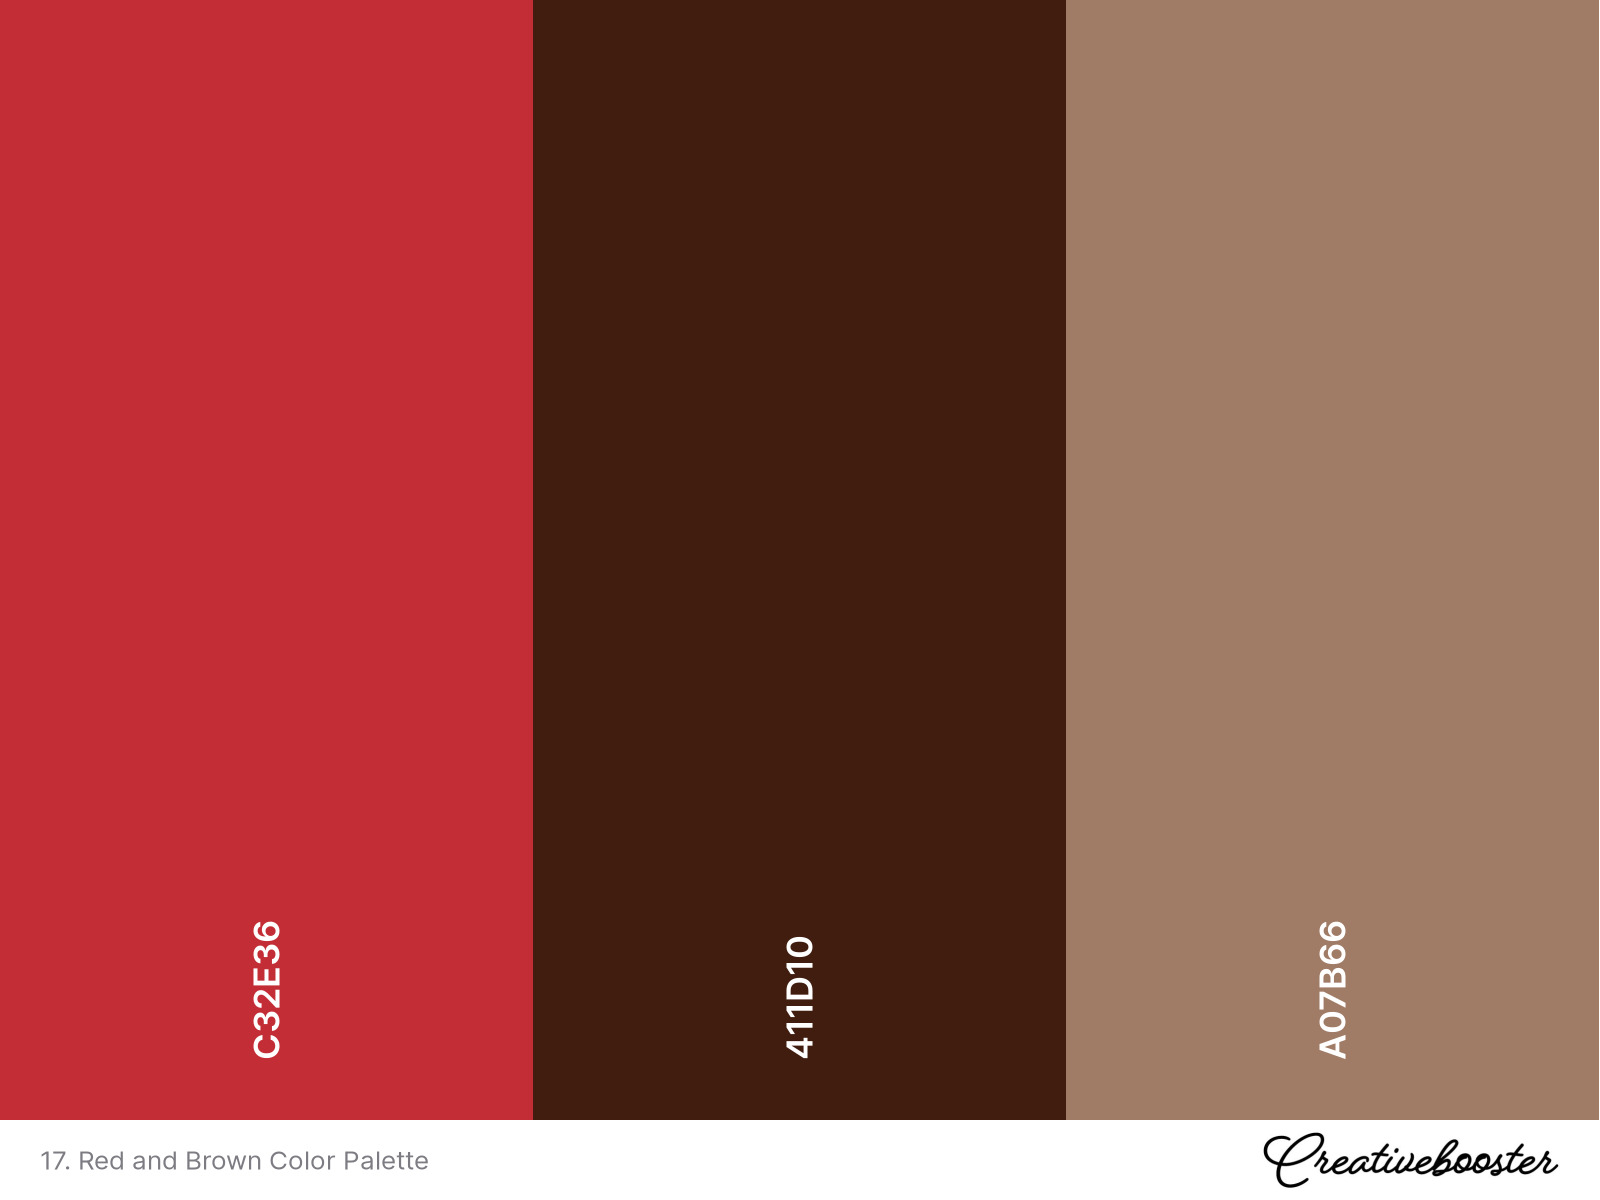 17. Red and Brown Color Palette